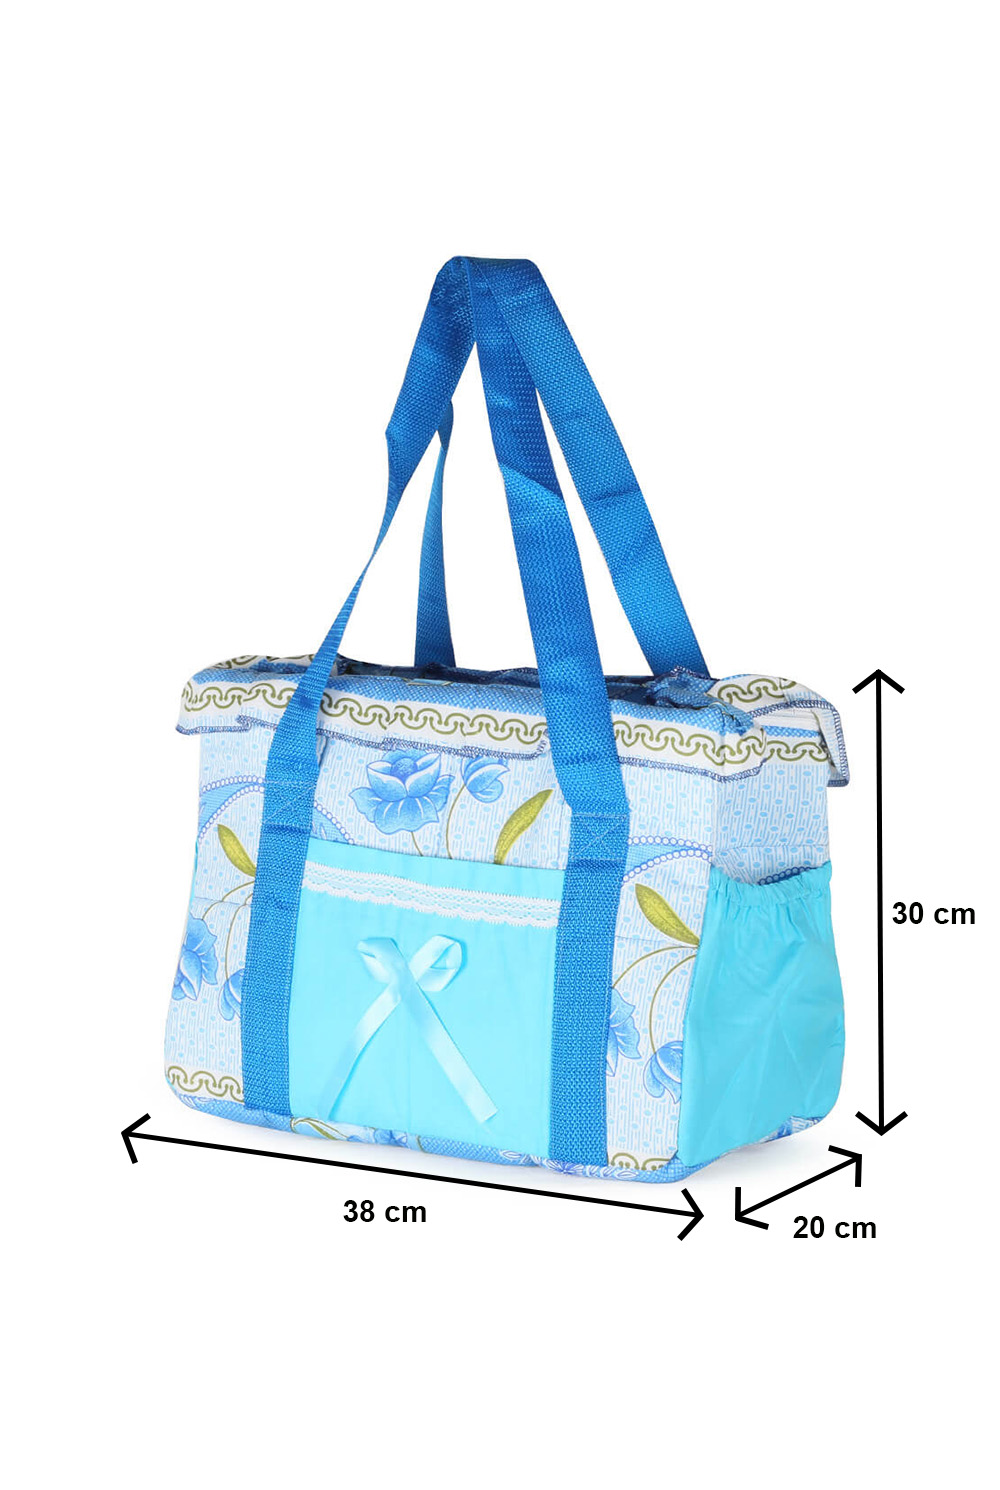 Buy motherly Stylish Babies Diaper Bags for Mothers - Premium Version  (Light Green) Online at Low Prices in India - Amazon.in